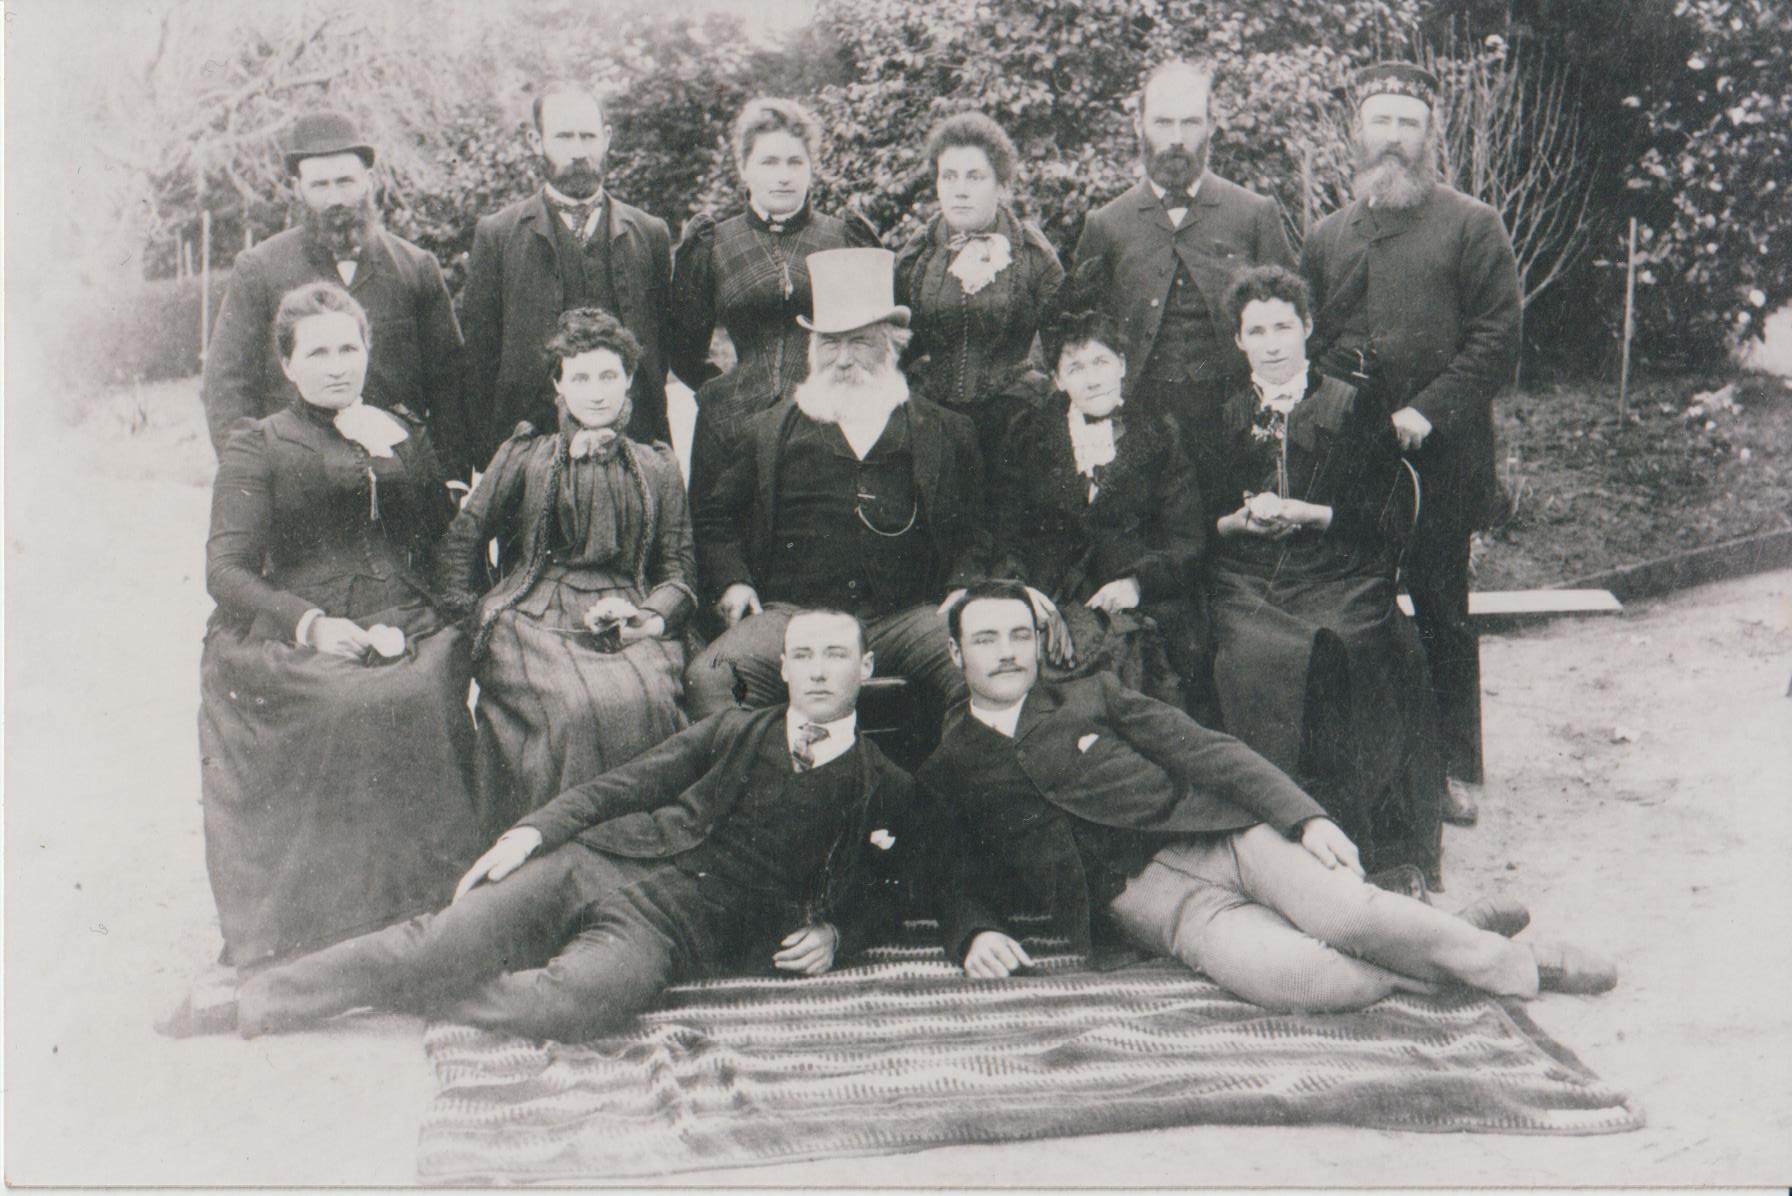 Image 3 of 4 - Black and white image of 7 men and 7 women. The men are wearing suits, with three of them wearing hats and the women are wearing Edwardian dresses. Two of the men are lying down in front of the others who are sitting and standing behind them. The family is standing outside with bushes and trees behind them.